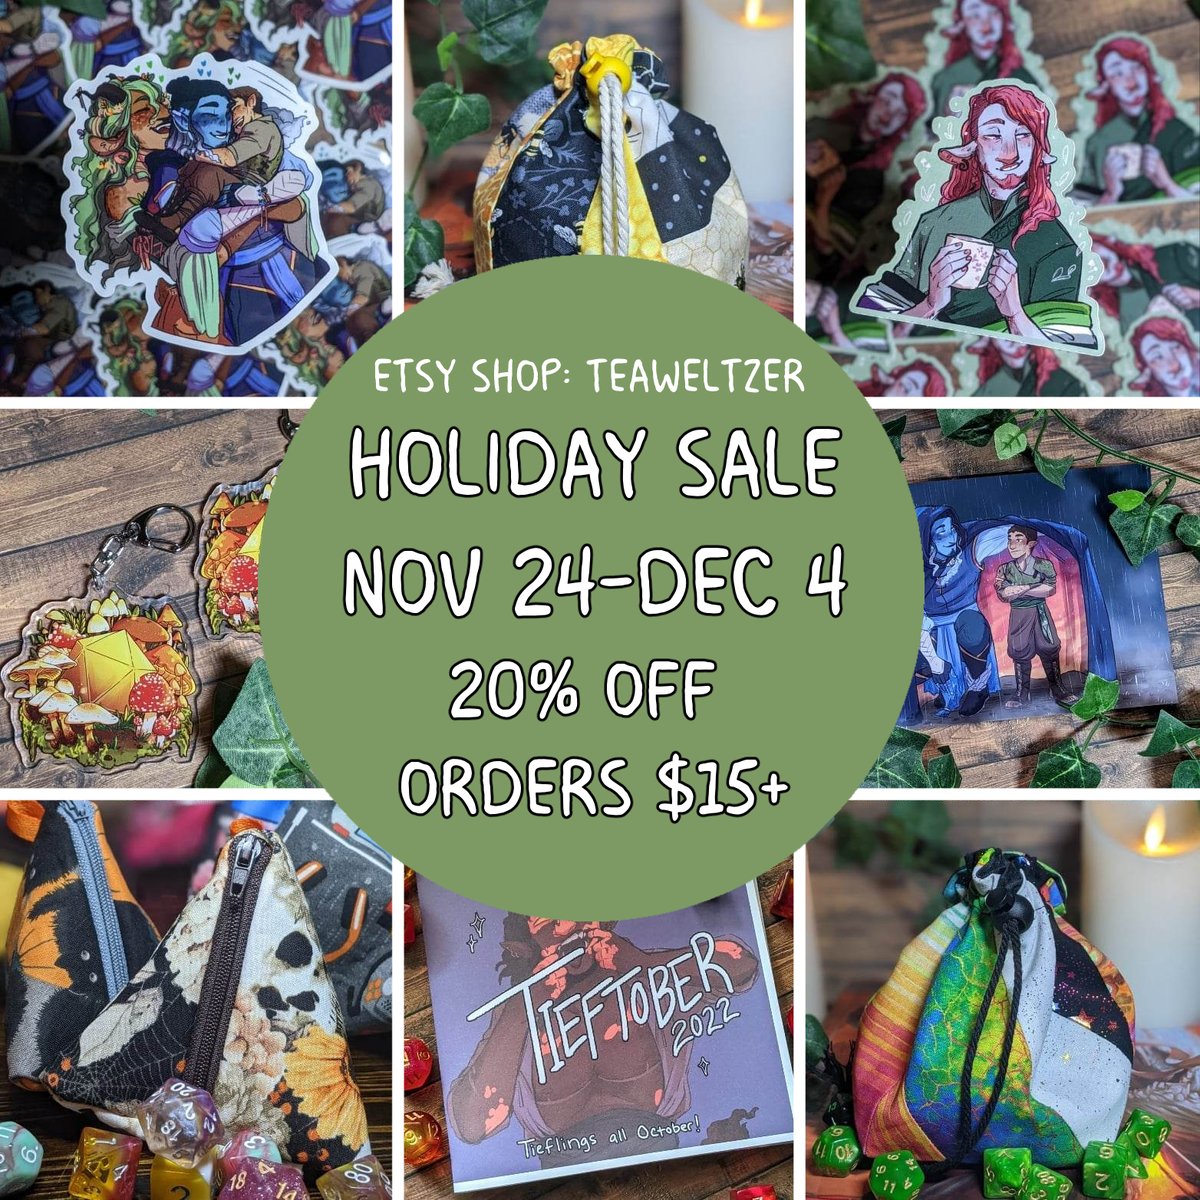 Sh🌿p has been updated & holiday sale will run from Nov. 24th-Dec 4th with orders $15+ will automatically be 20% off!